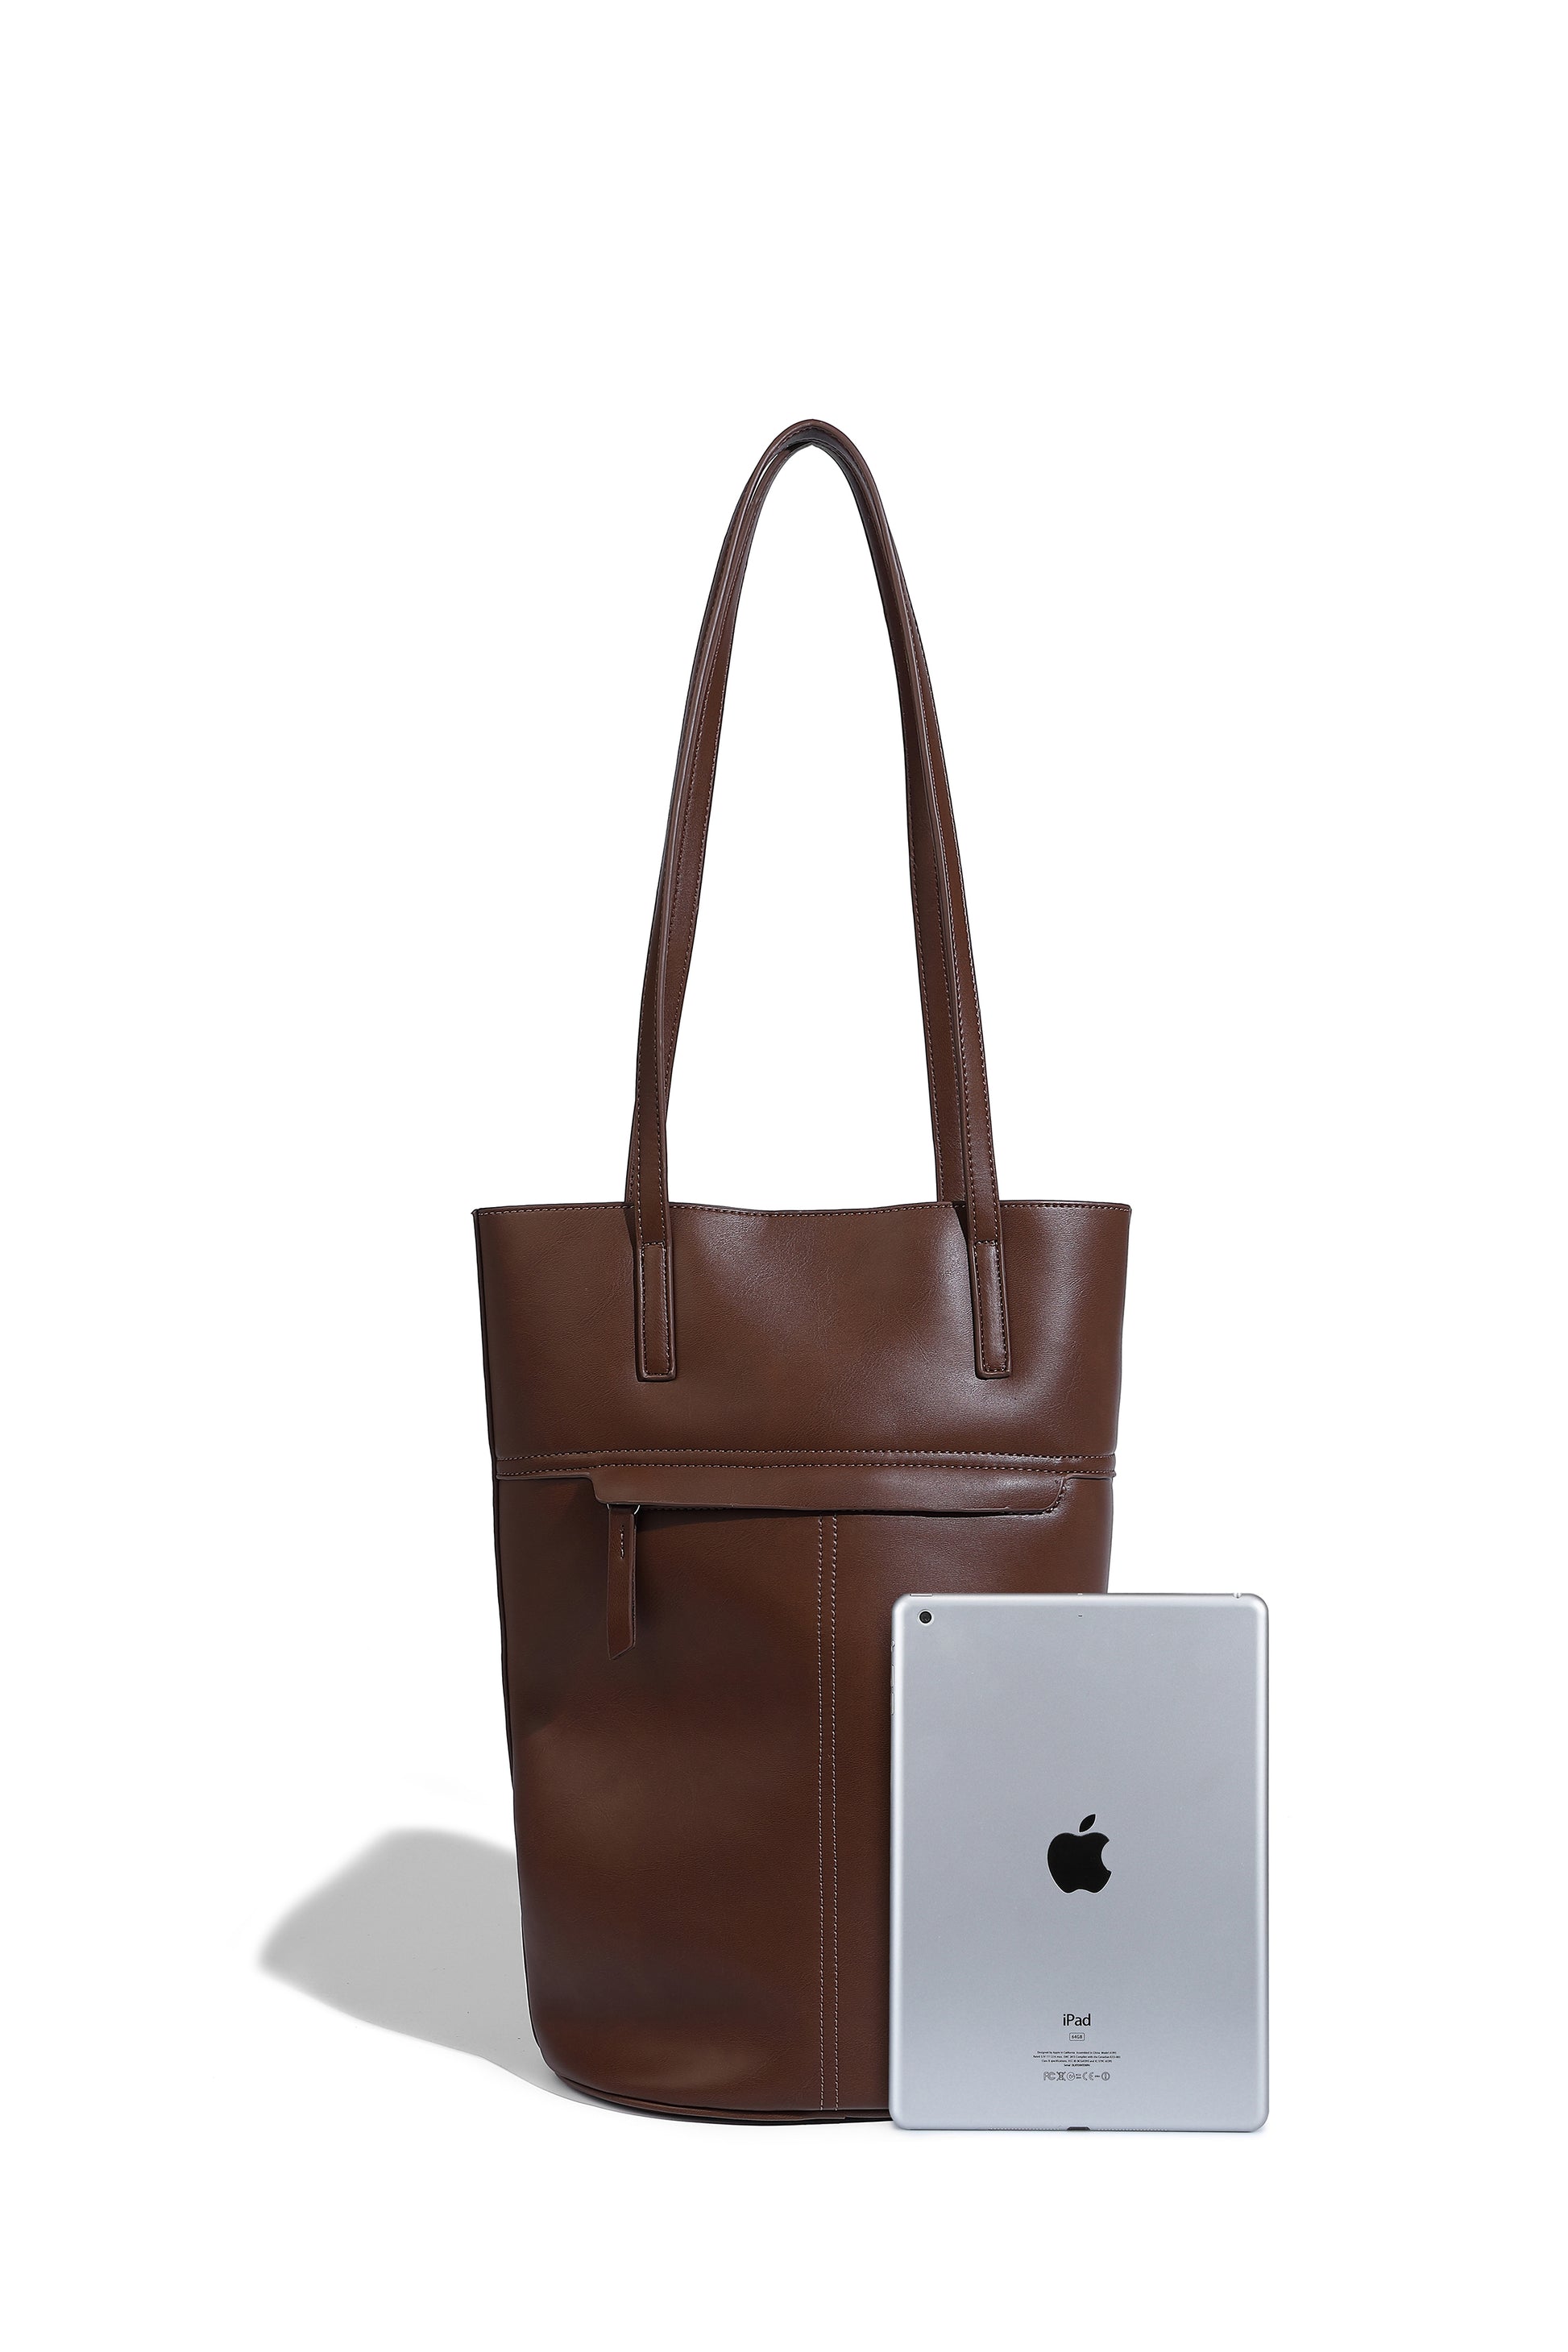 The Bag can hold your phone/tissue/cosmetics and other items.